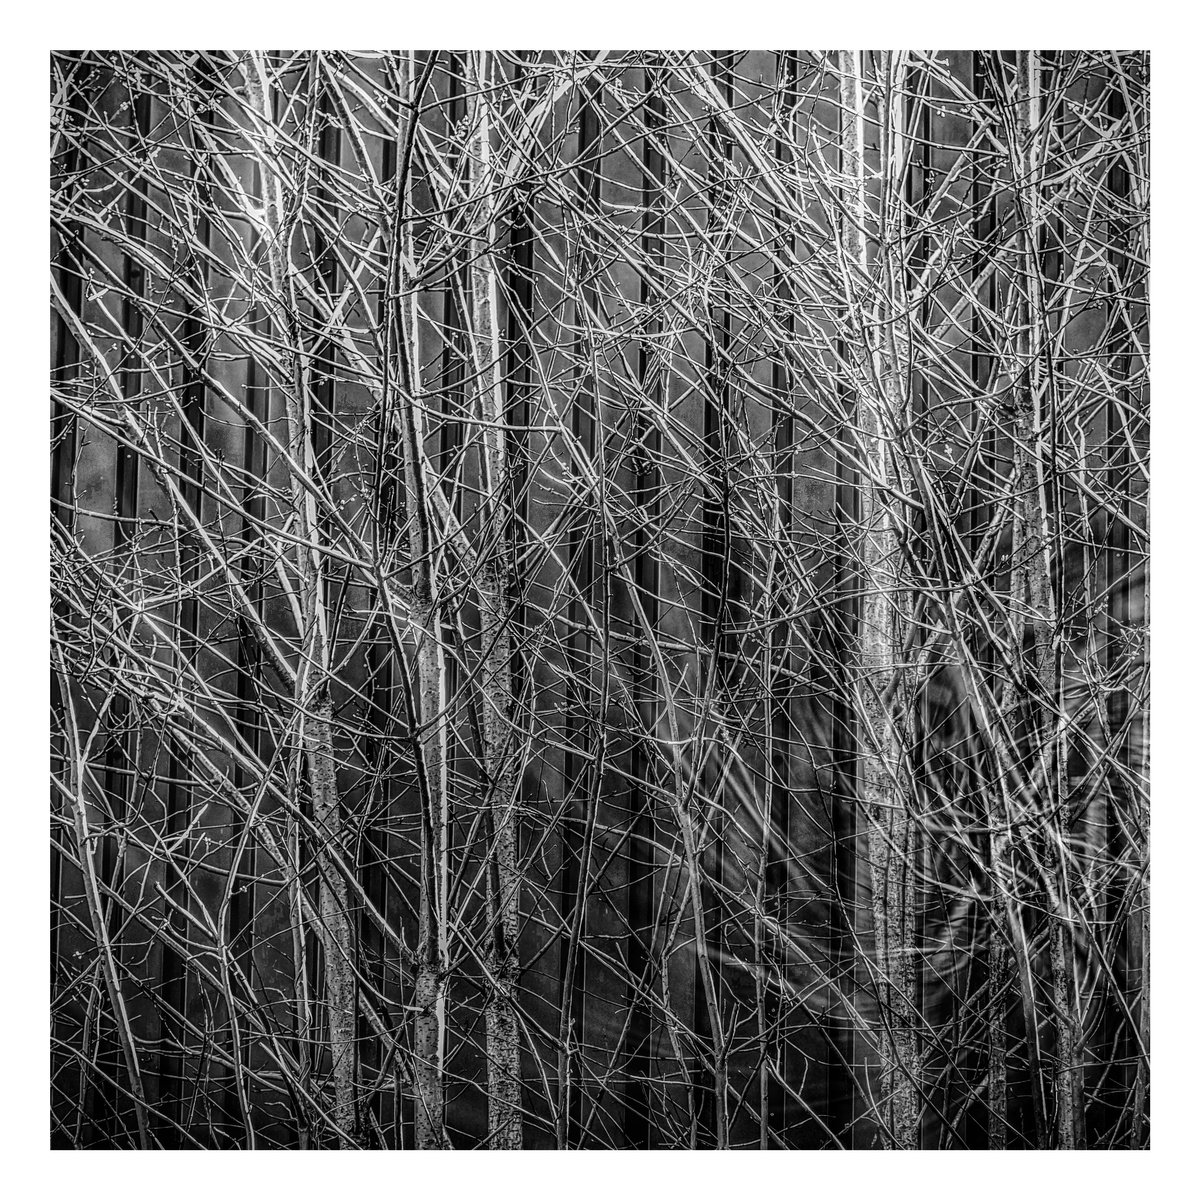 Twigs and Branches. Limited Edition Impressionist Photograph #1/10 by Graham Briggs